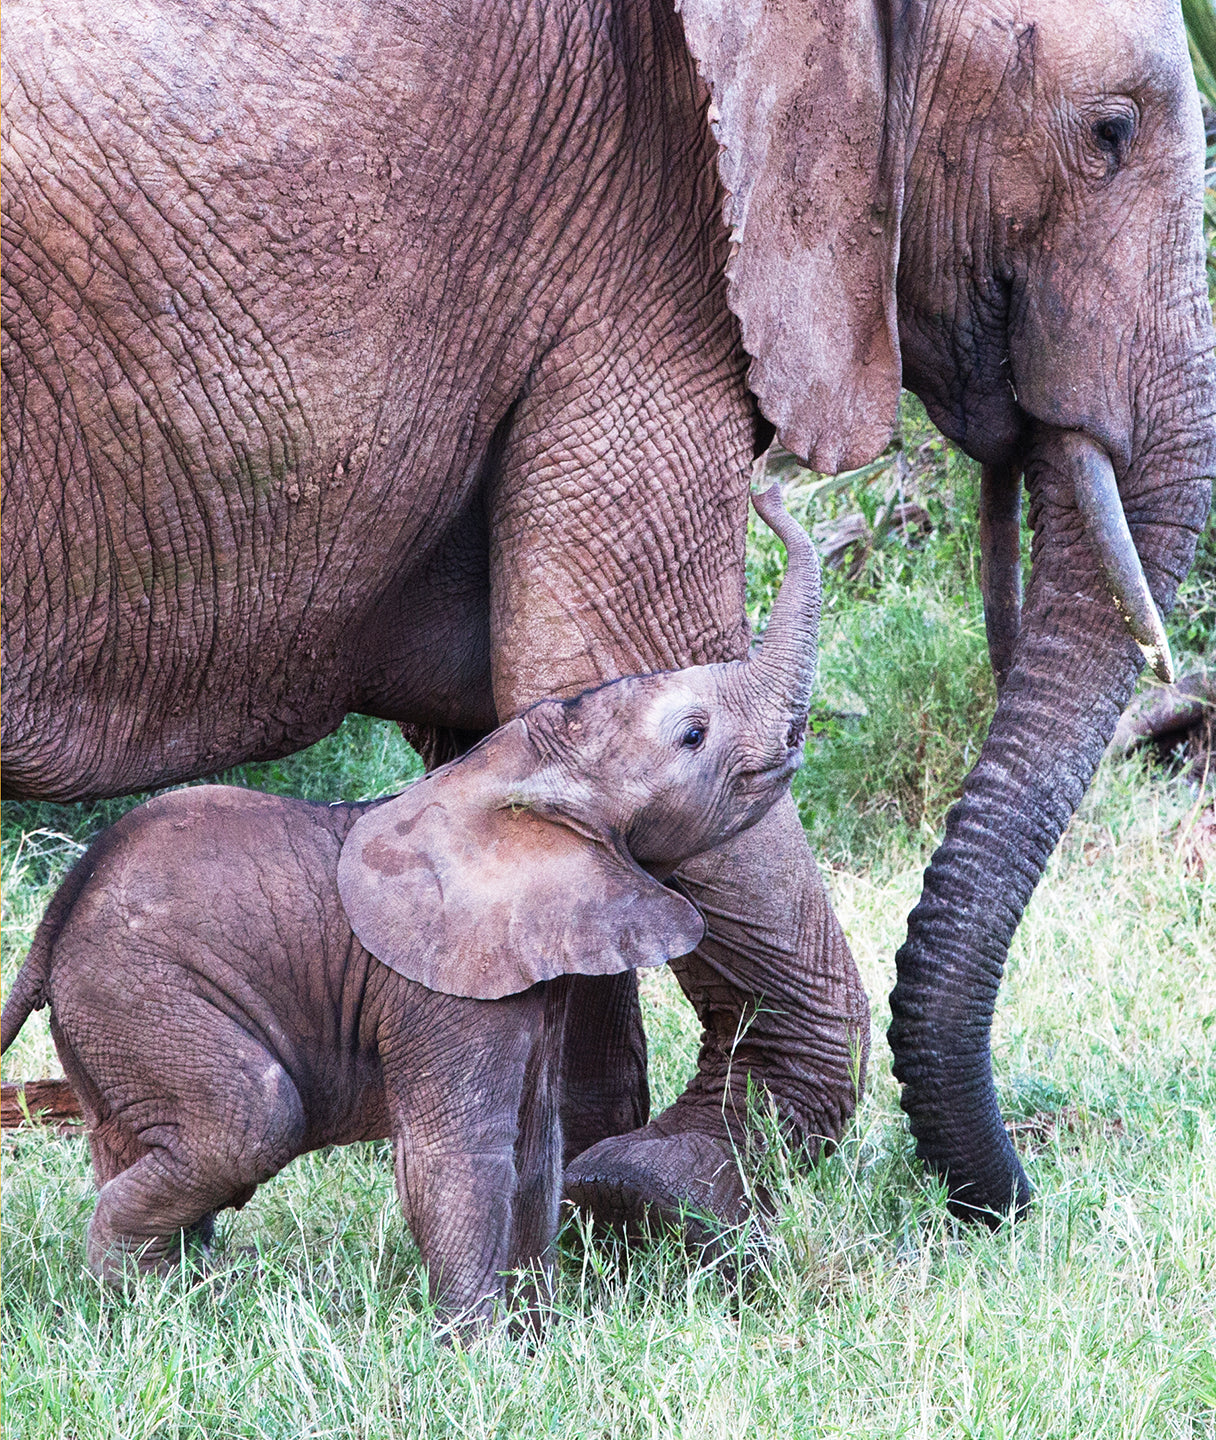 Baby Elephant and Mother - Photograph by Carl Sams and Jean Stoick.